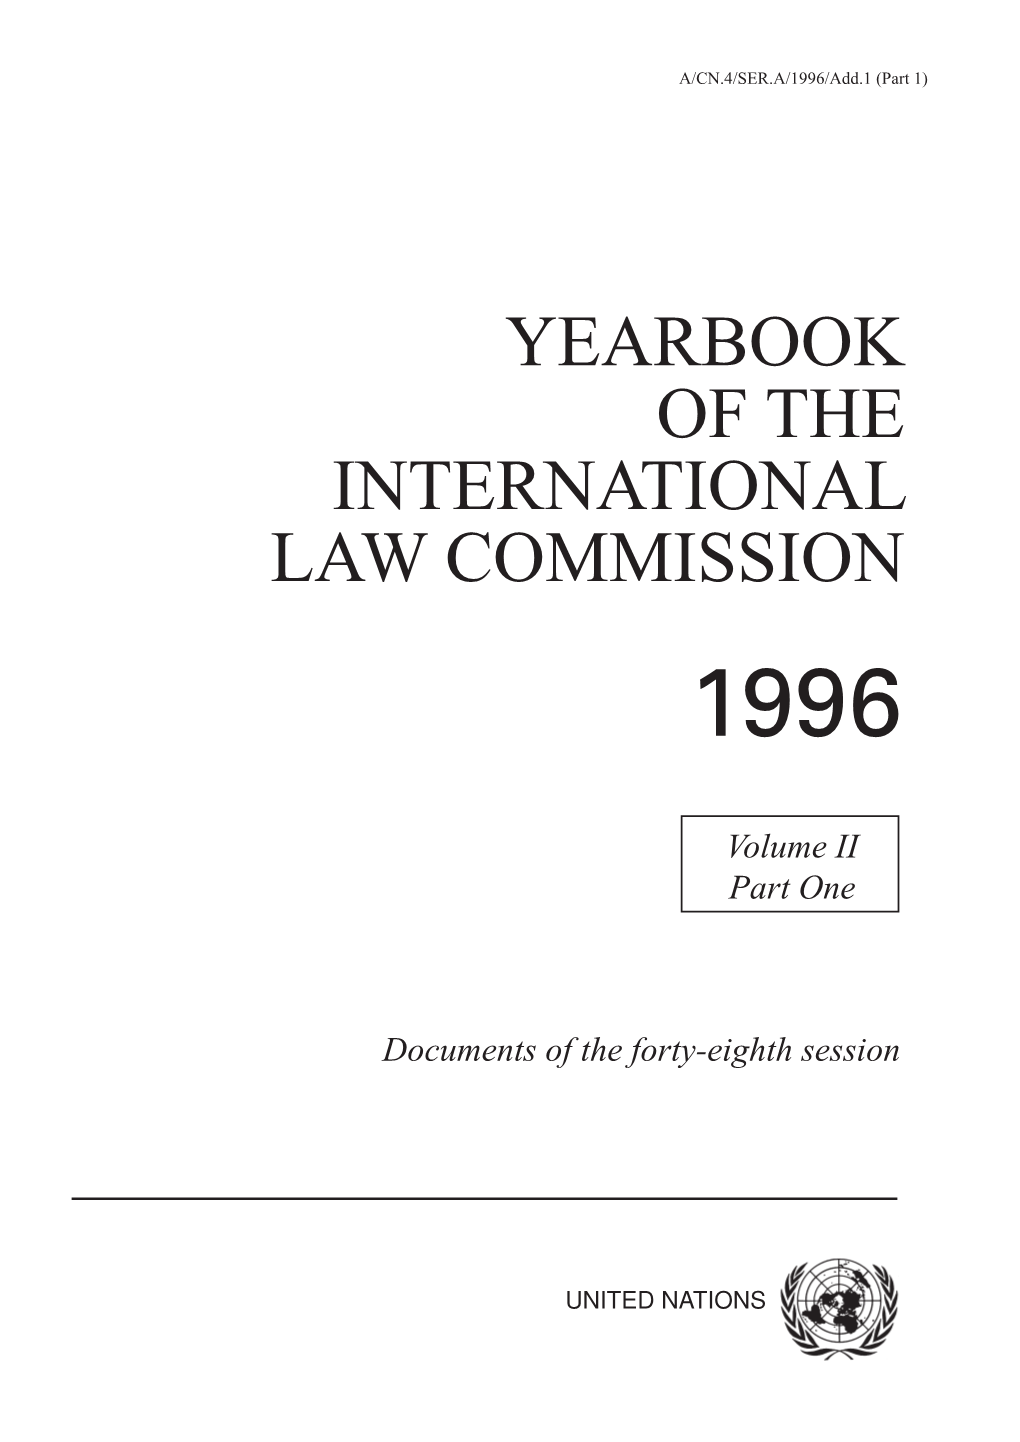 Yearbook of the International Law Commission 1996